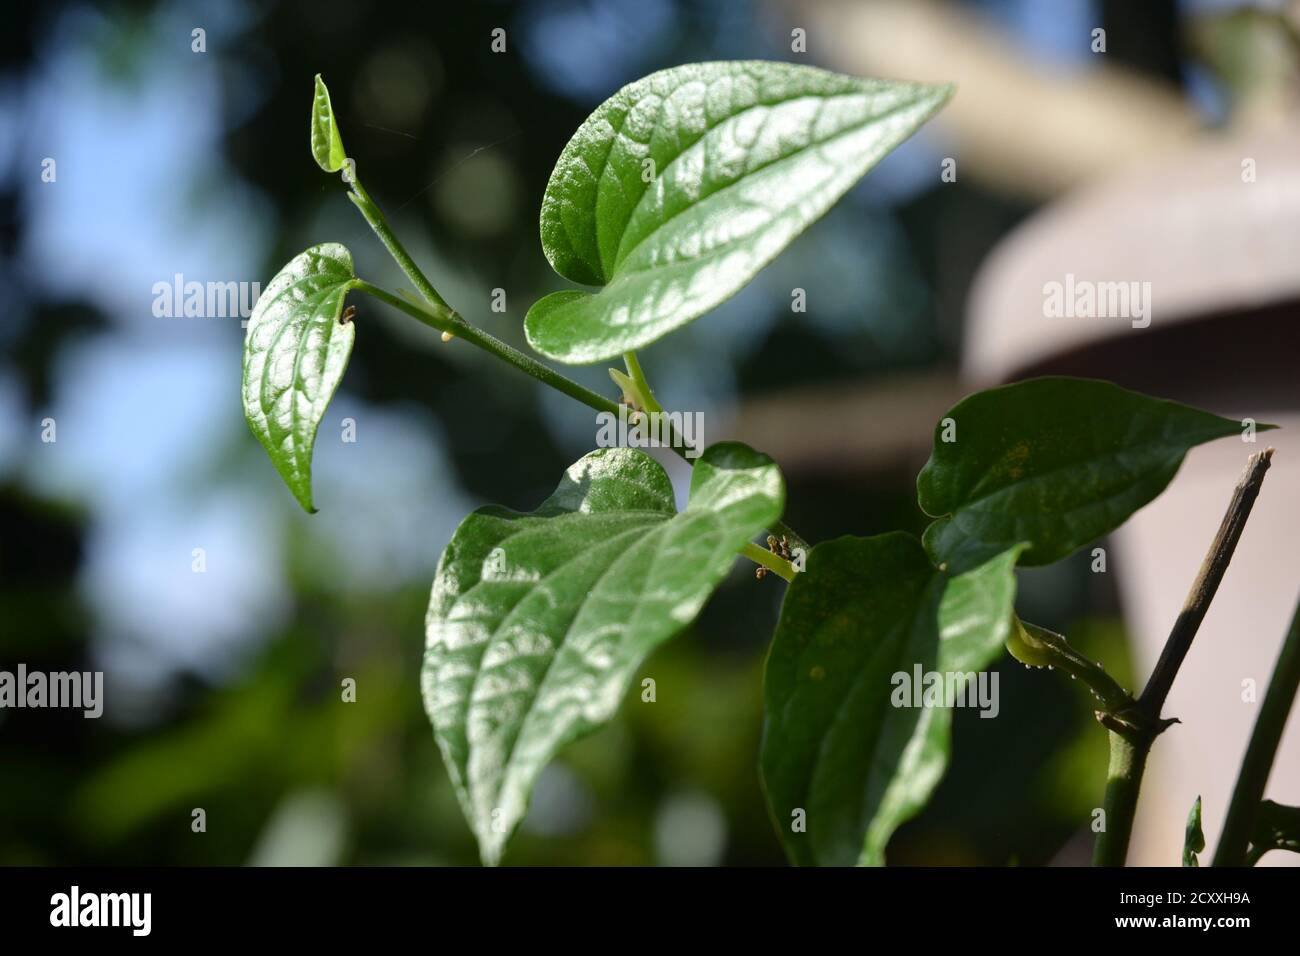 A green betel plant with bright leaves looks beautiful. Betel leaves are used as mouth freshener and herbal purposes in South Asian countries. Stock Photo